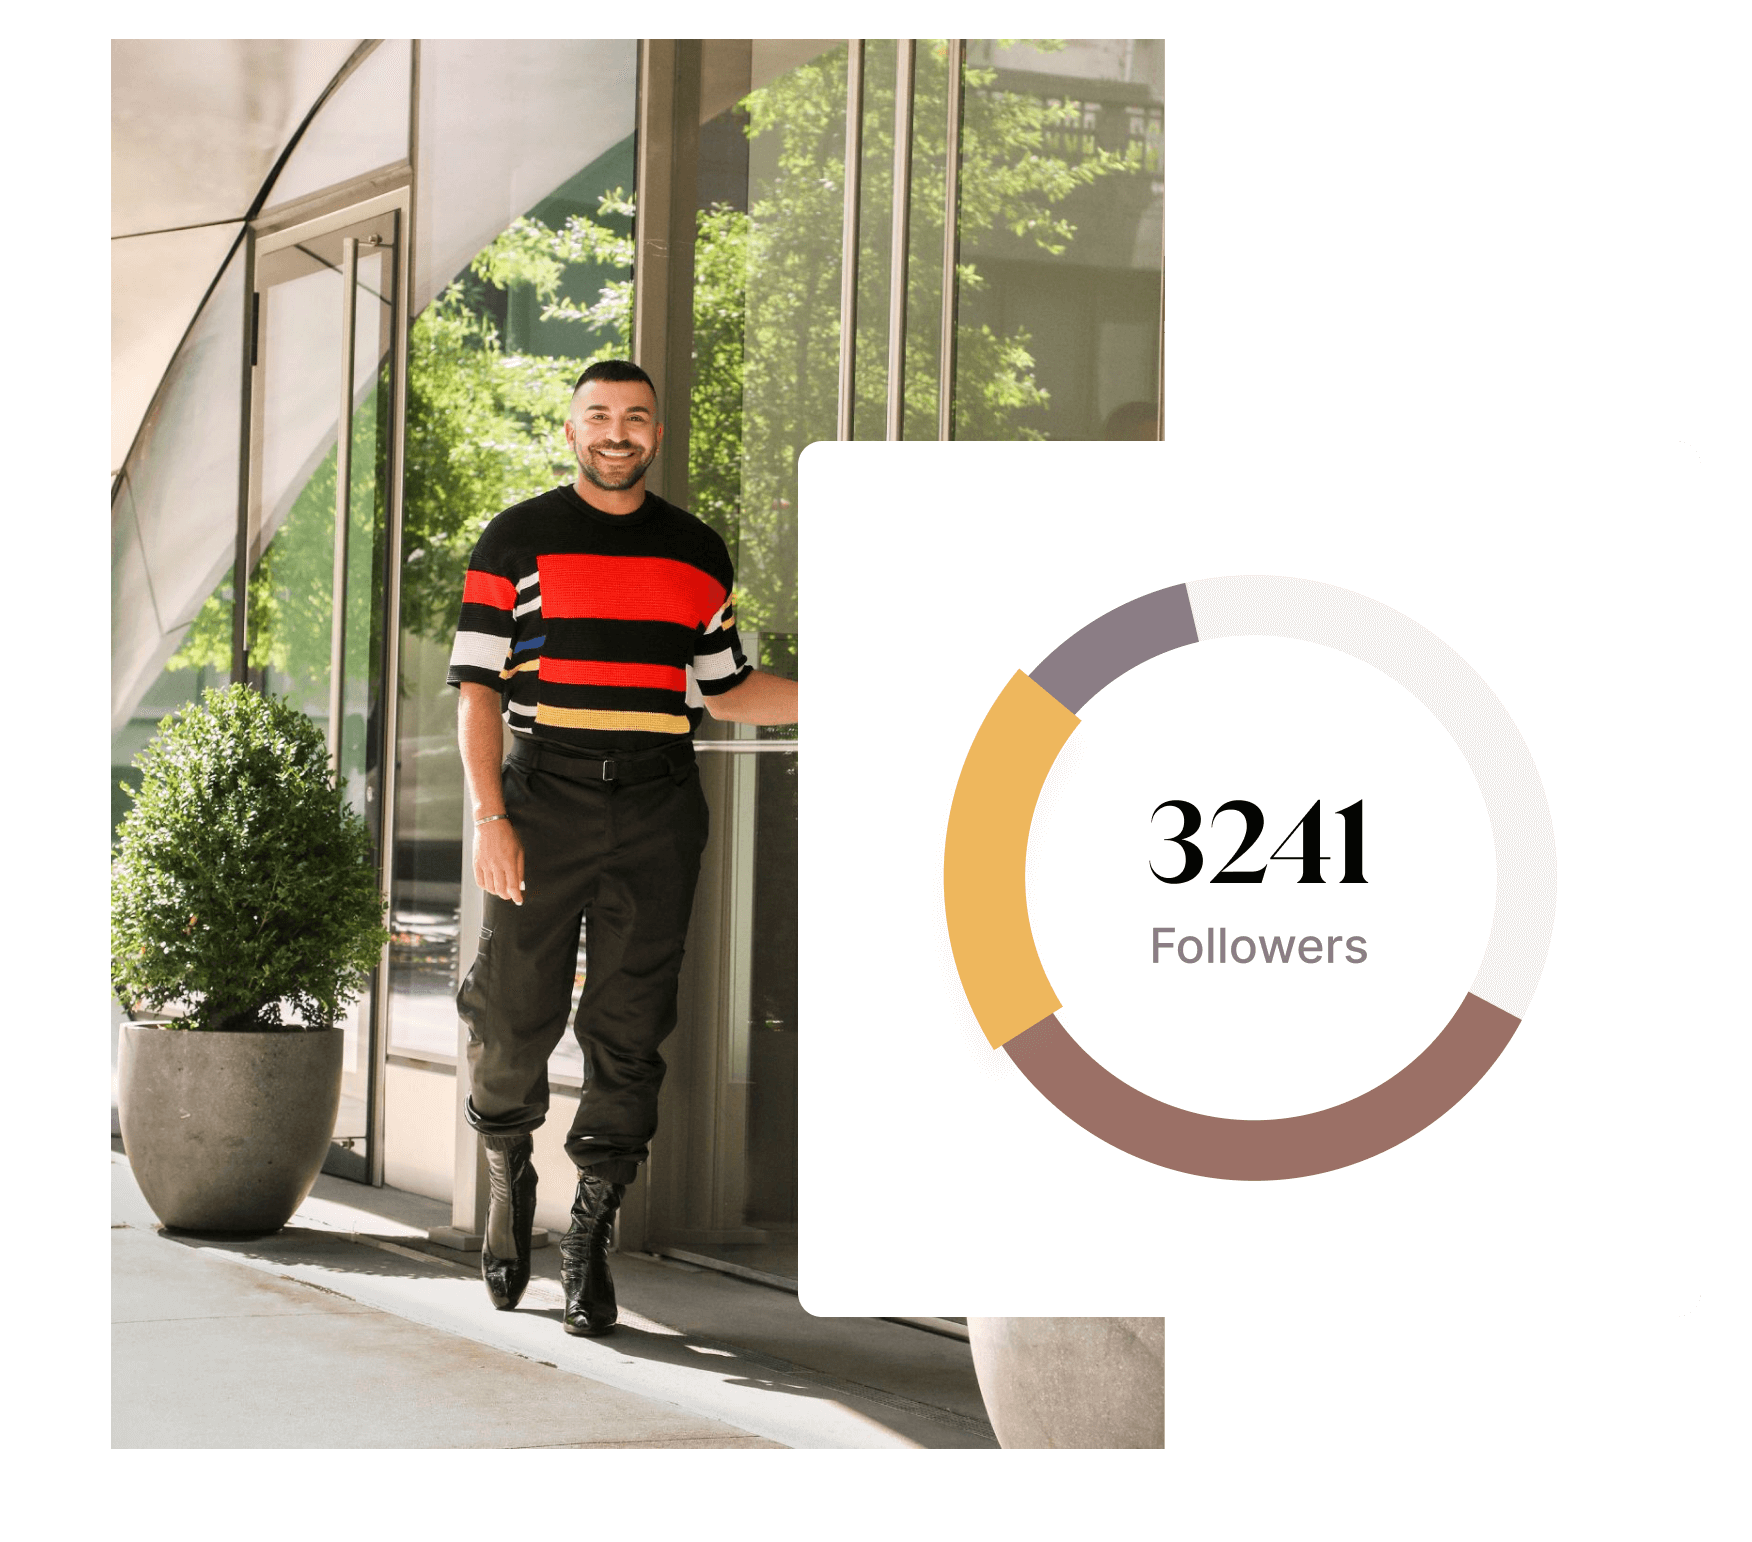 graphic showing real estate agent and follower count for instagram